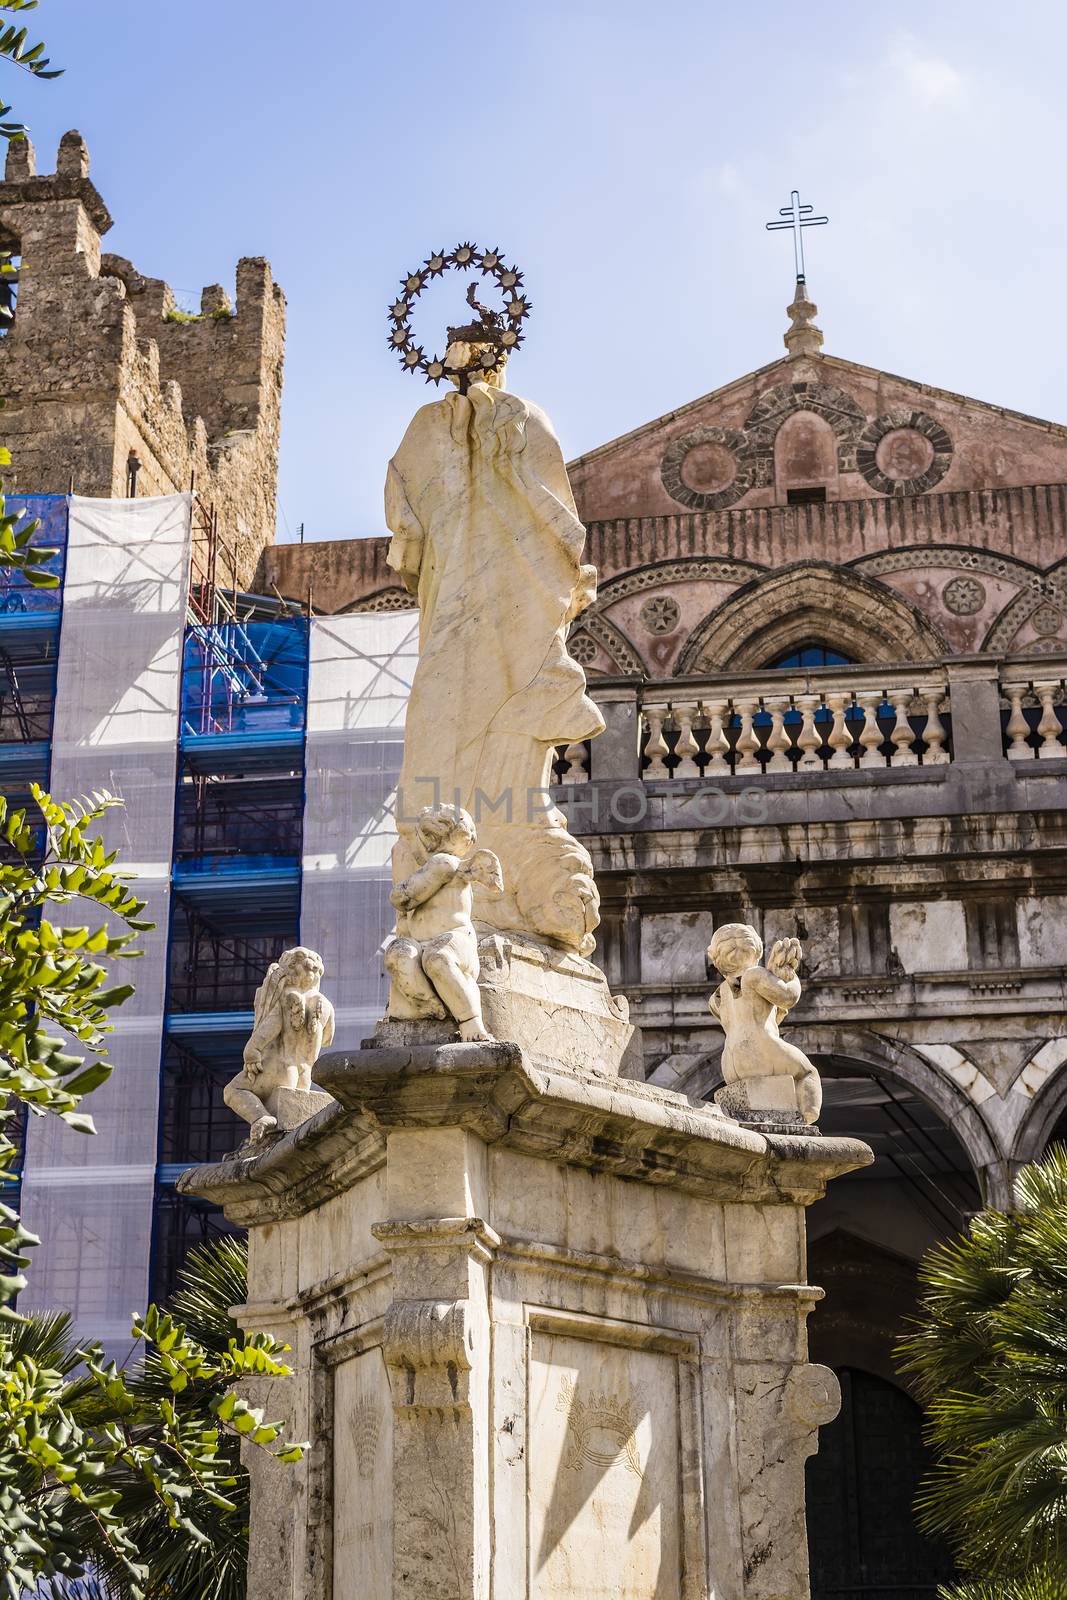 Statue in front of the historic Cathedral of Santa Maria Nuova, in the center of Monreale, Palermo, Sicily, Italy